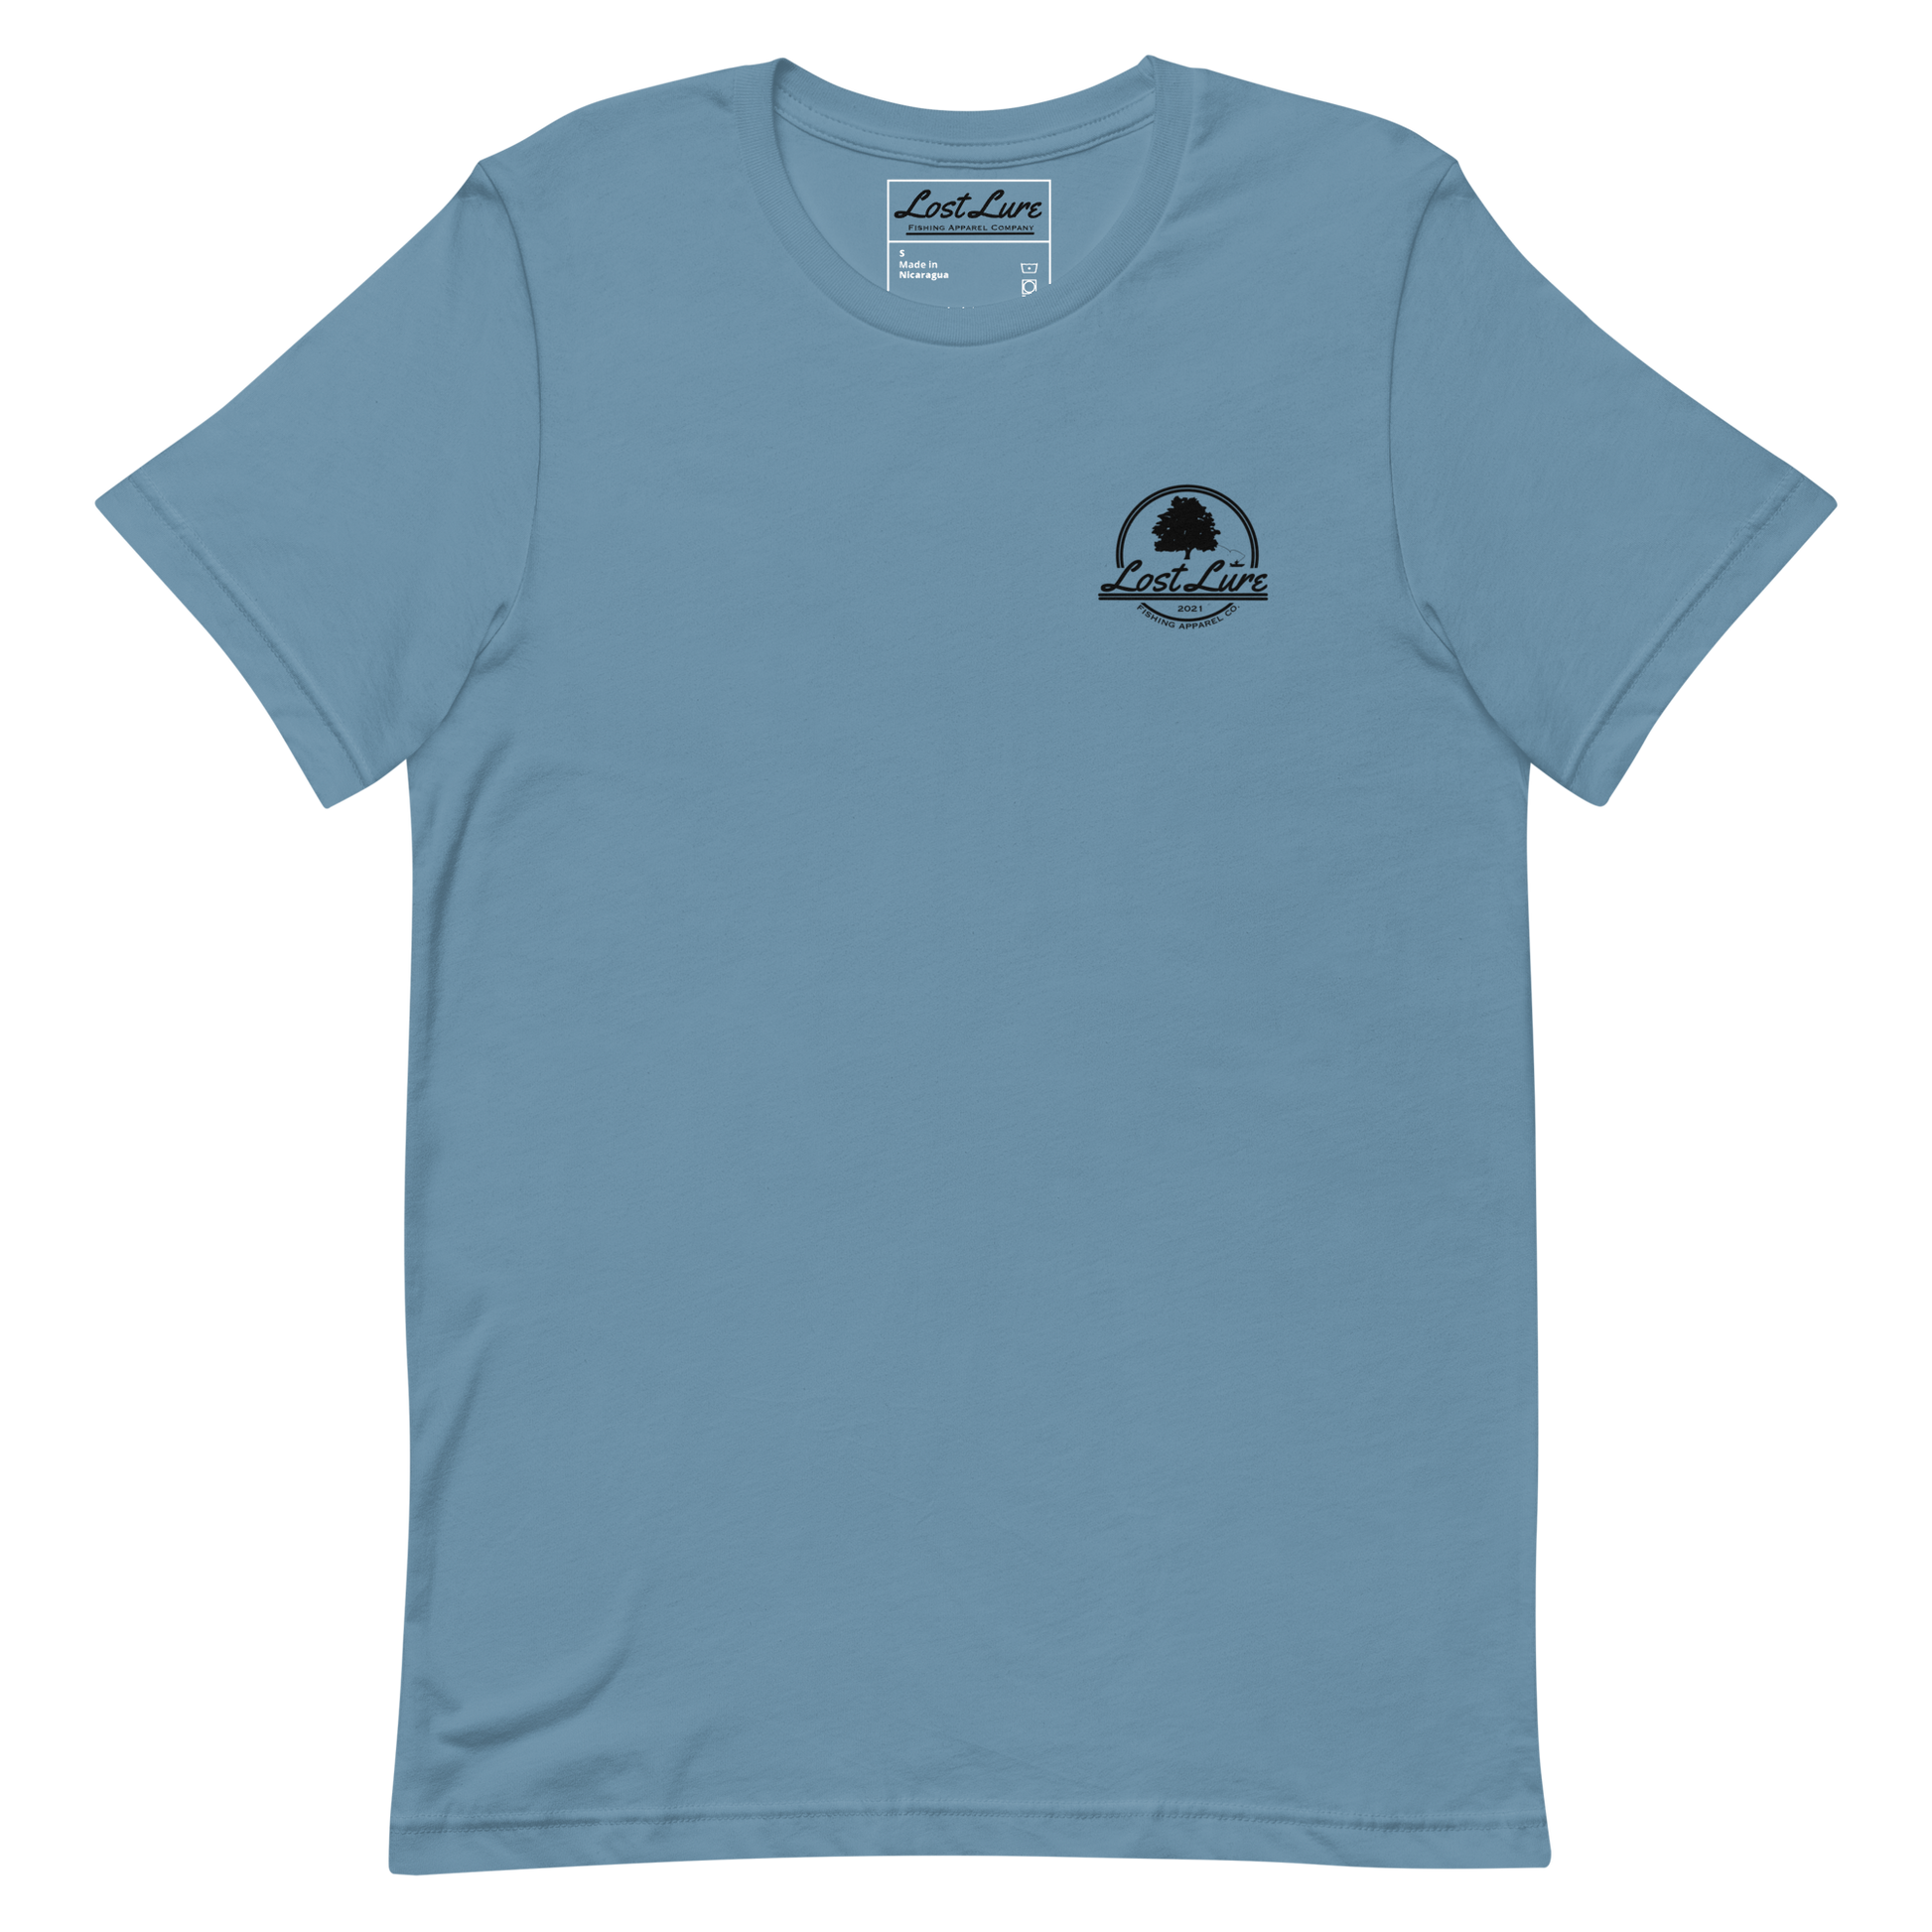 Cutthroat Trout fishing shirt. It’s an American traditional style design with a cutthroat trout and a dagger. The shirt reads Cutthroat trout, est. 2021, lost lure fishing apparel company. The front of the shirt has the lost lure logo. Blue fishing shirt, front side